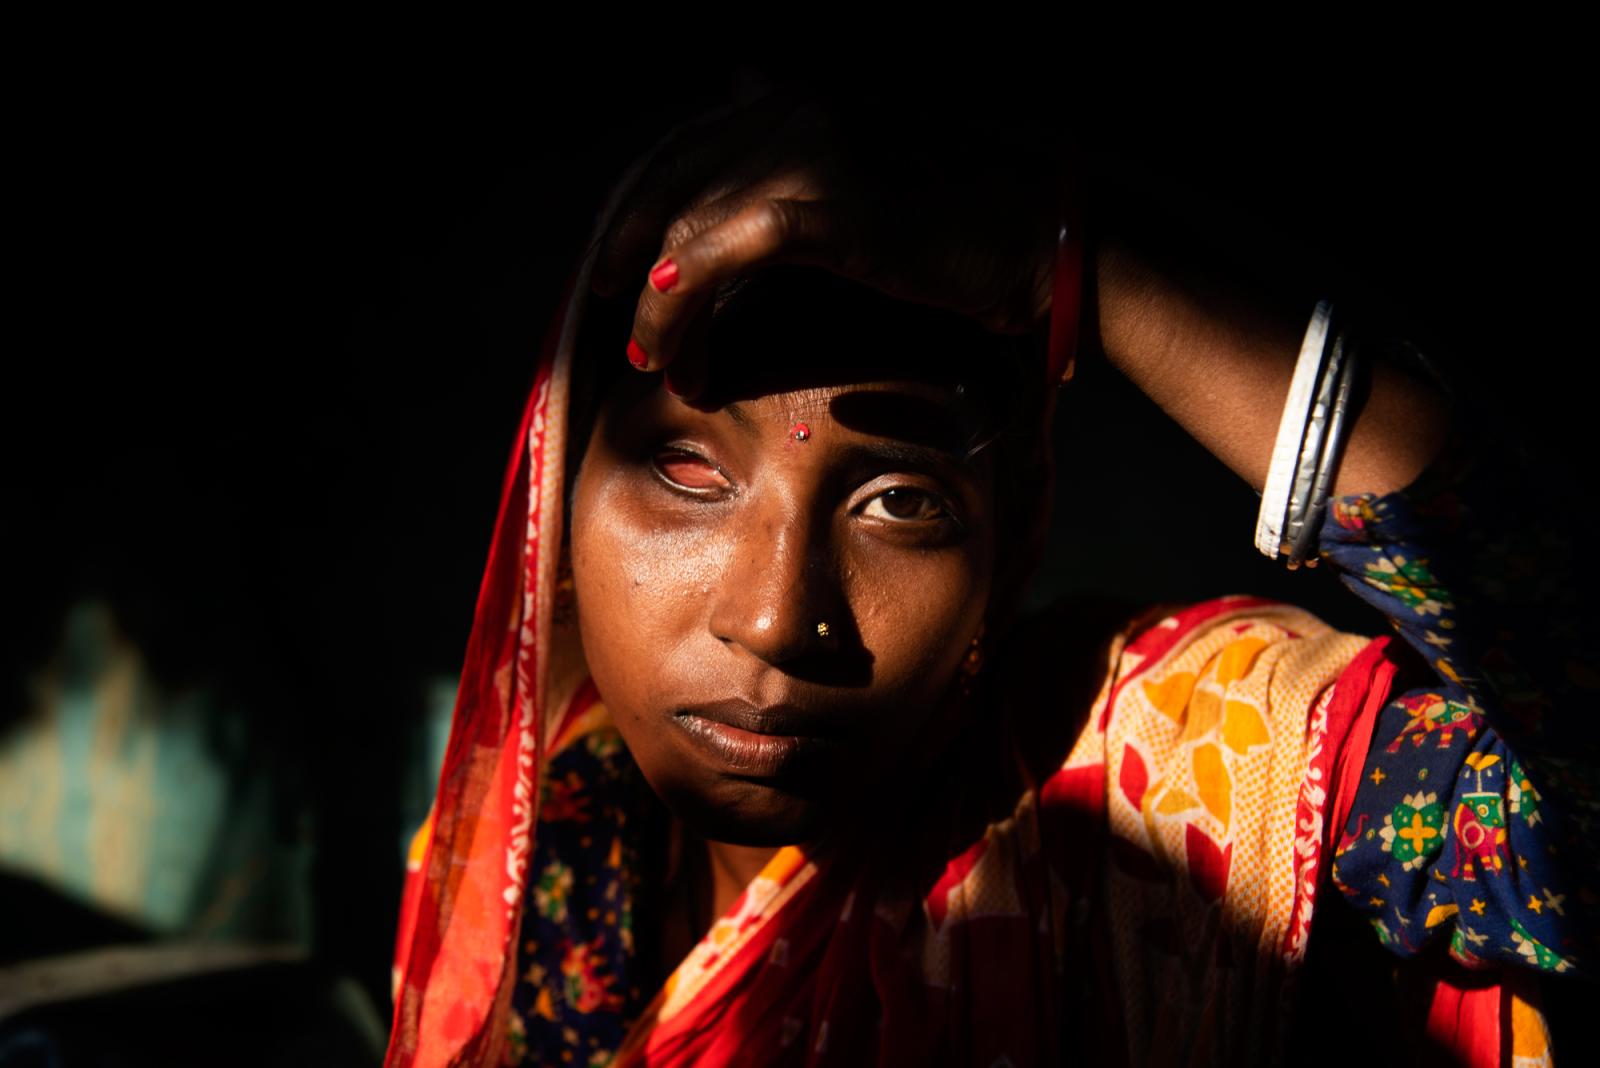 Portraits - Saraswati Roy, 22 years old lady, wife of 32 years old...